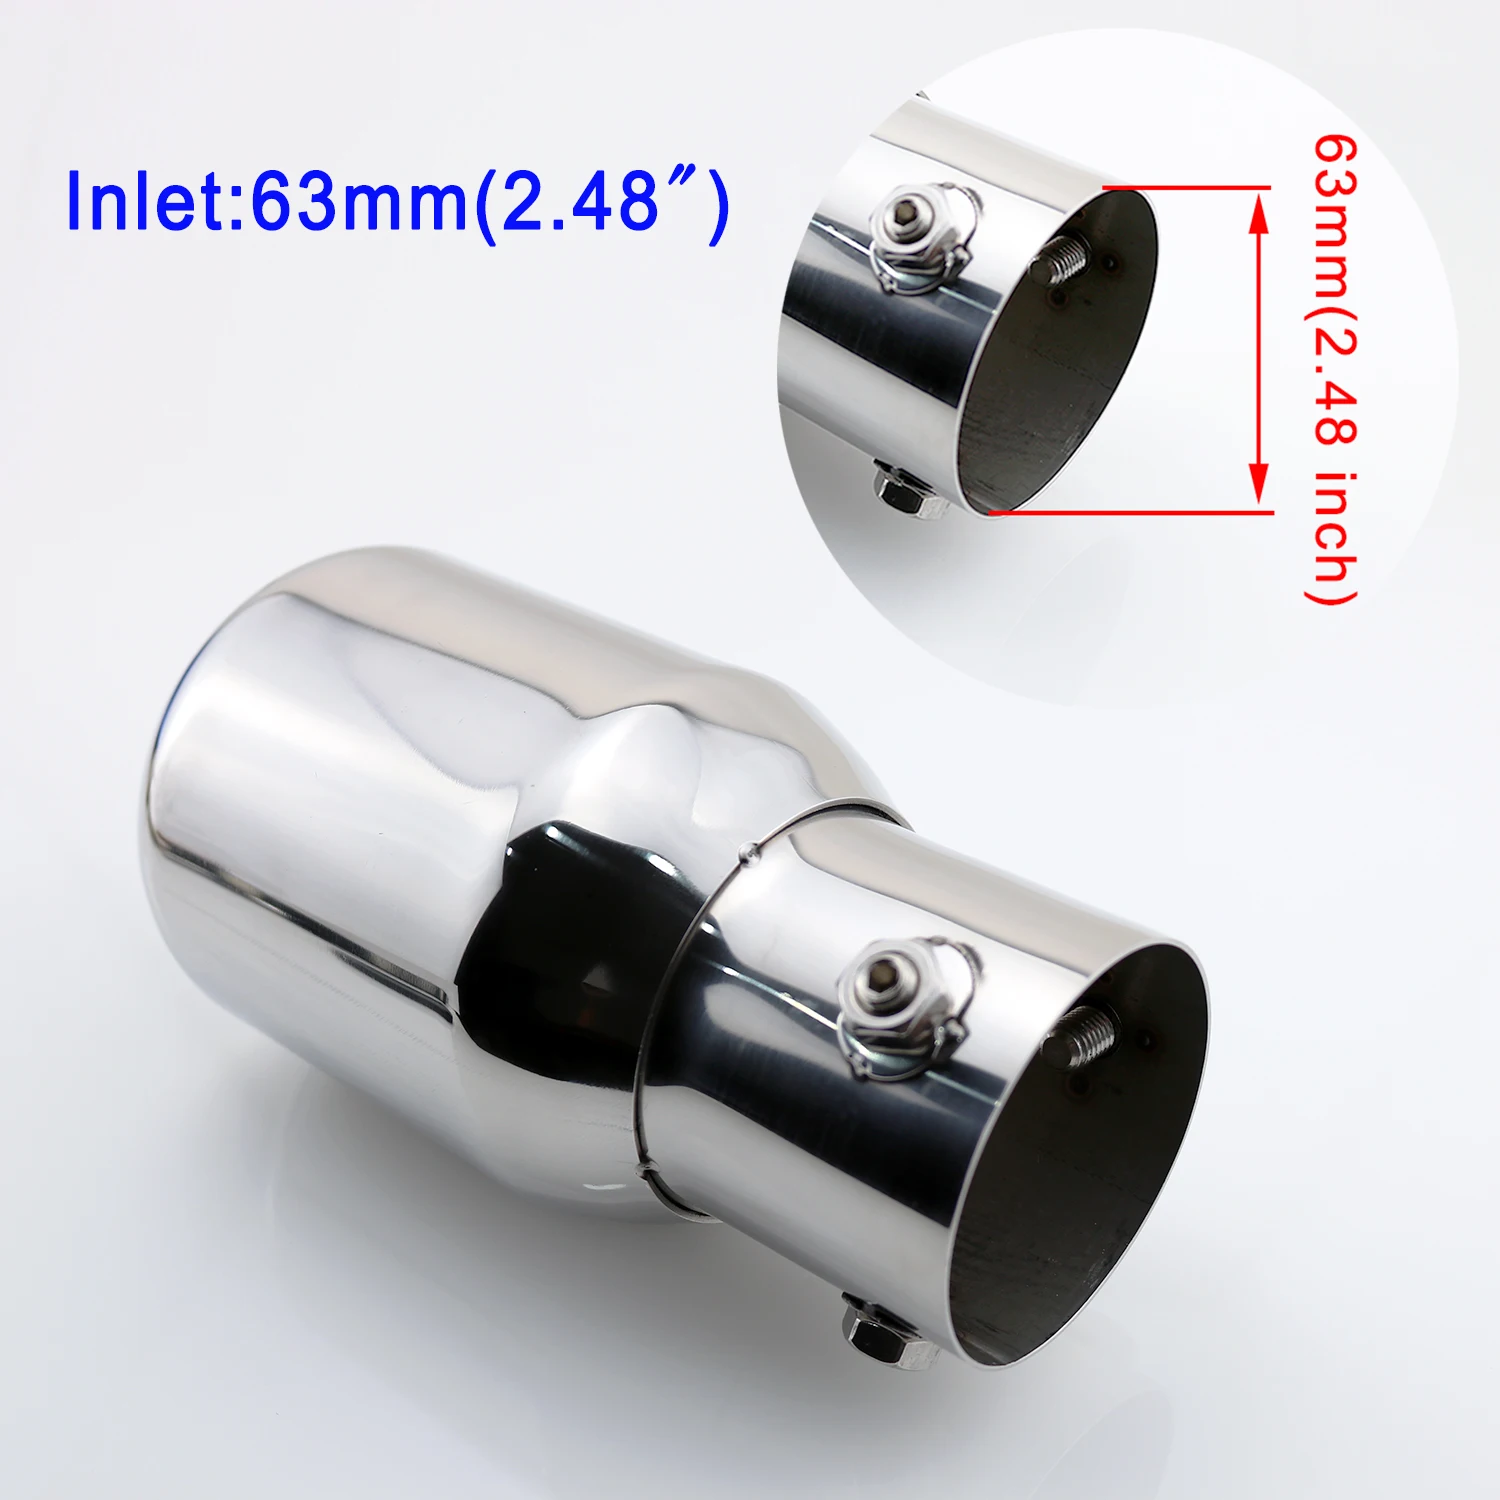 

Universal Car Tailpipe 2.5" 63mm Inlet Diameter Tail Exhaust Rear Muffler End Pipe Tip Cover Trim Truck Accessories